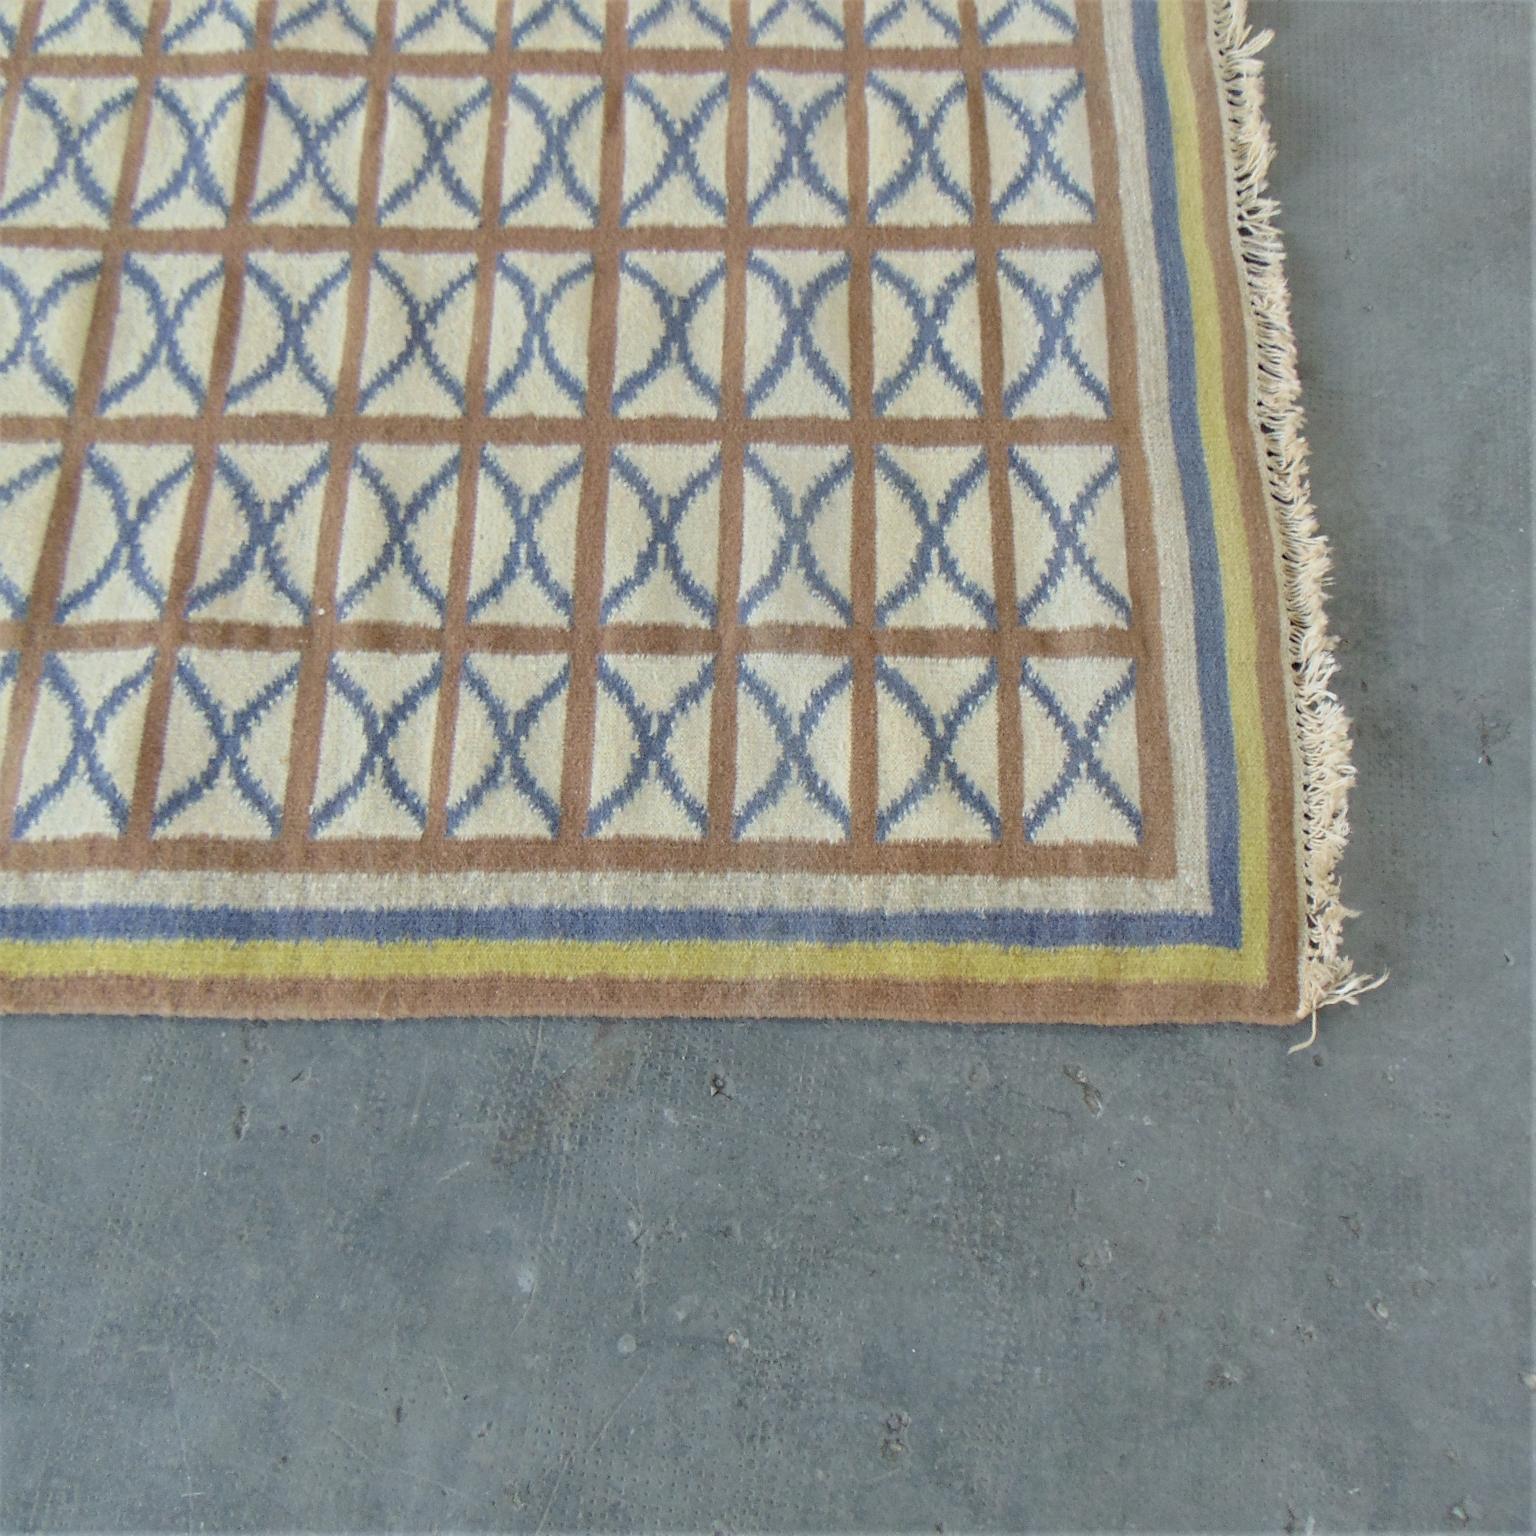 Late 20th Century 1975 Handwoven Kilim Vintage Indian Rug Blue Brown Yellow Ivory Background India For Sale